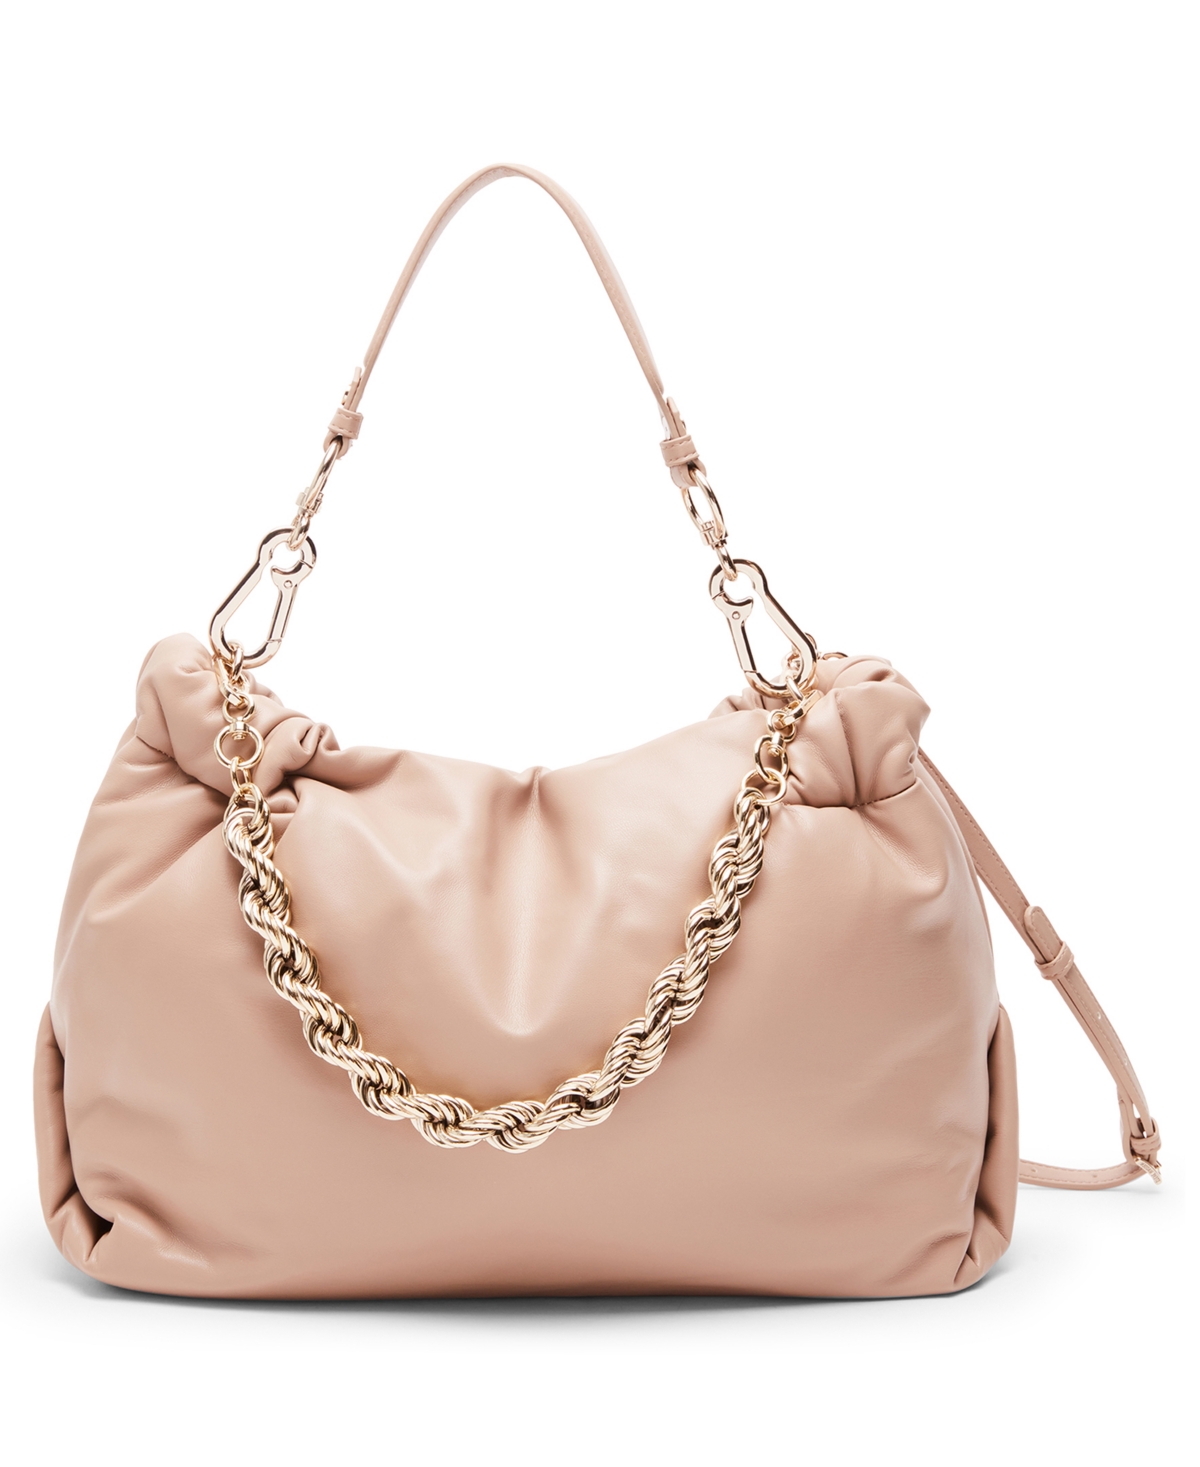 Remy Shoulder Bag with Chain - Nude